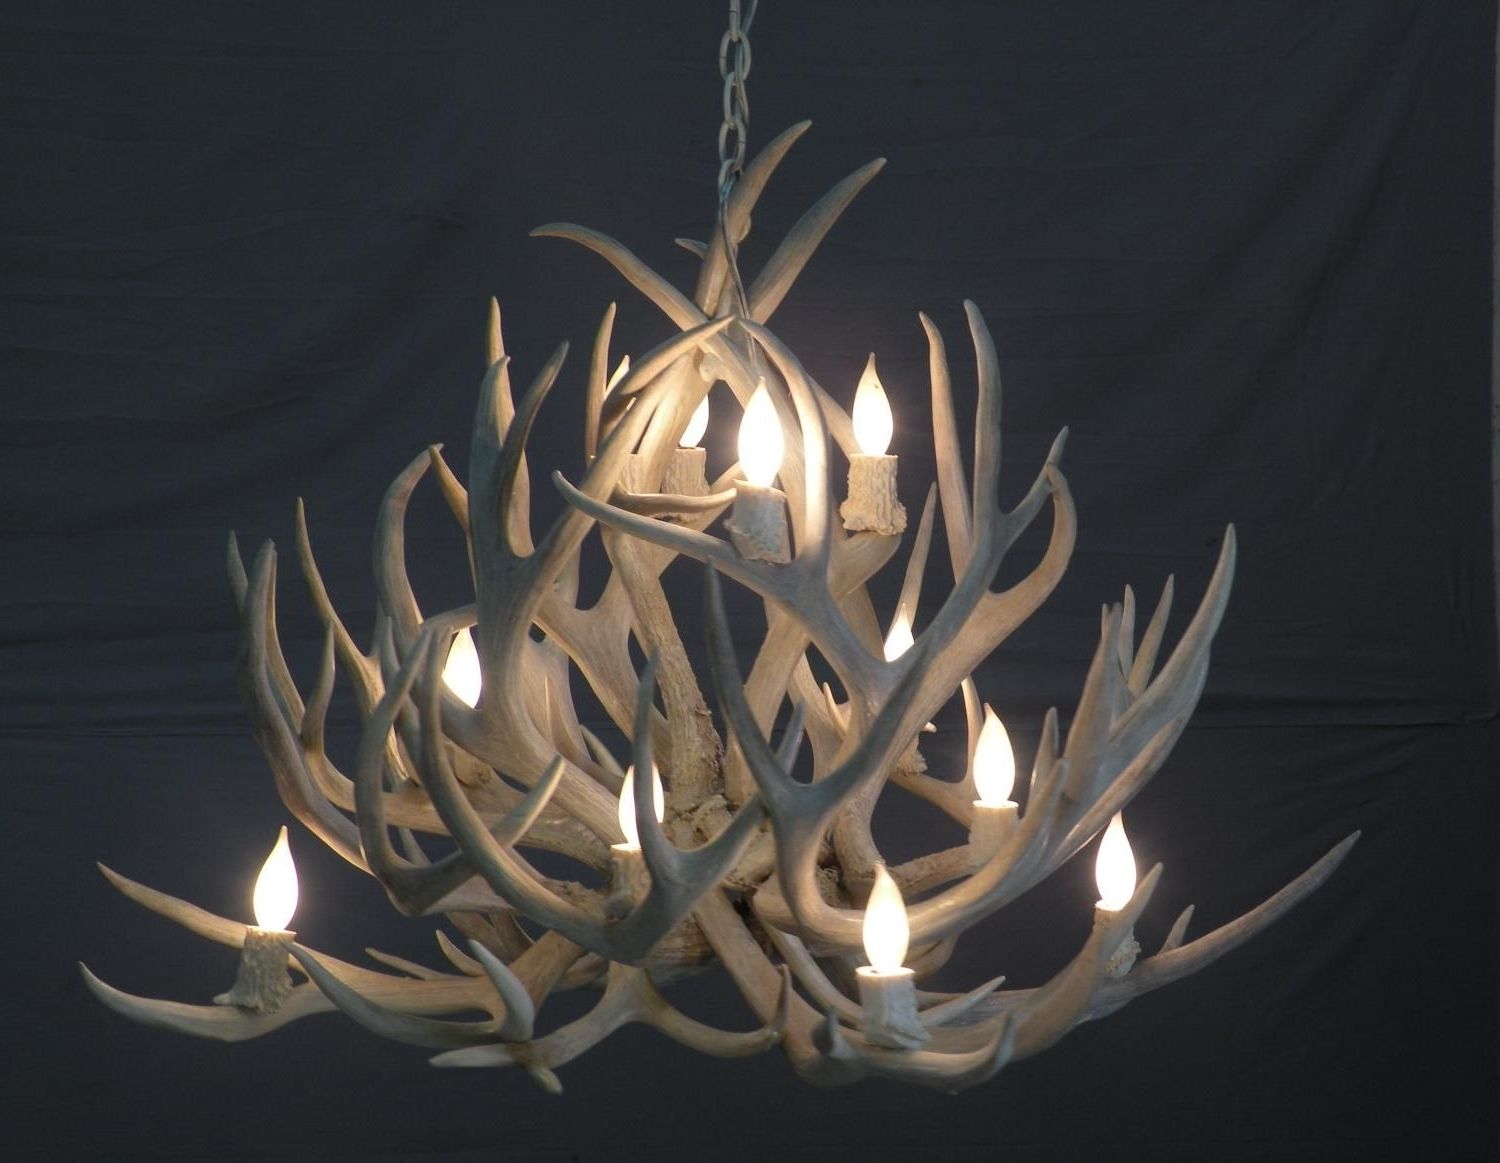 2018 Turquoise Antler Chandeliers For Lamps: Antler Chandelier 6 Light Large Antler Chandelier Uk Lucite (View 5 of 15)